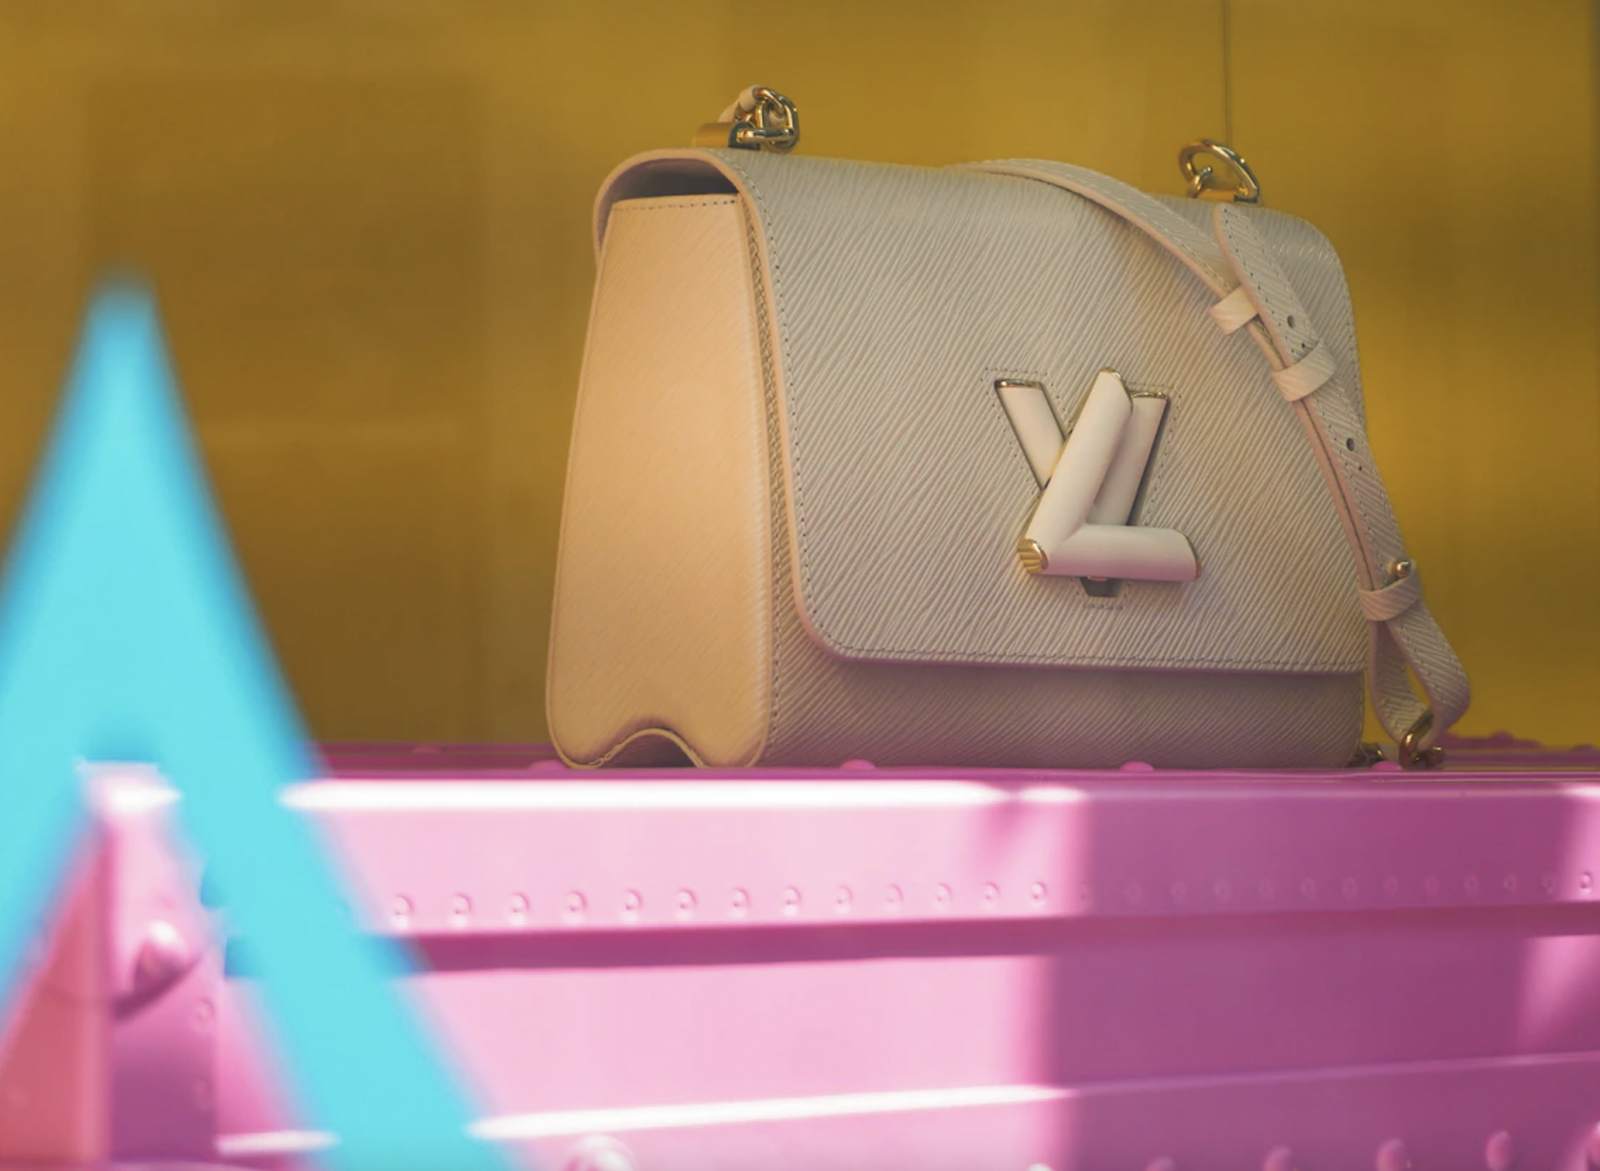 An employee checks a leather bag in the Louis Vuitton workshop in